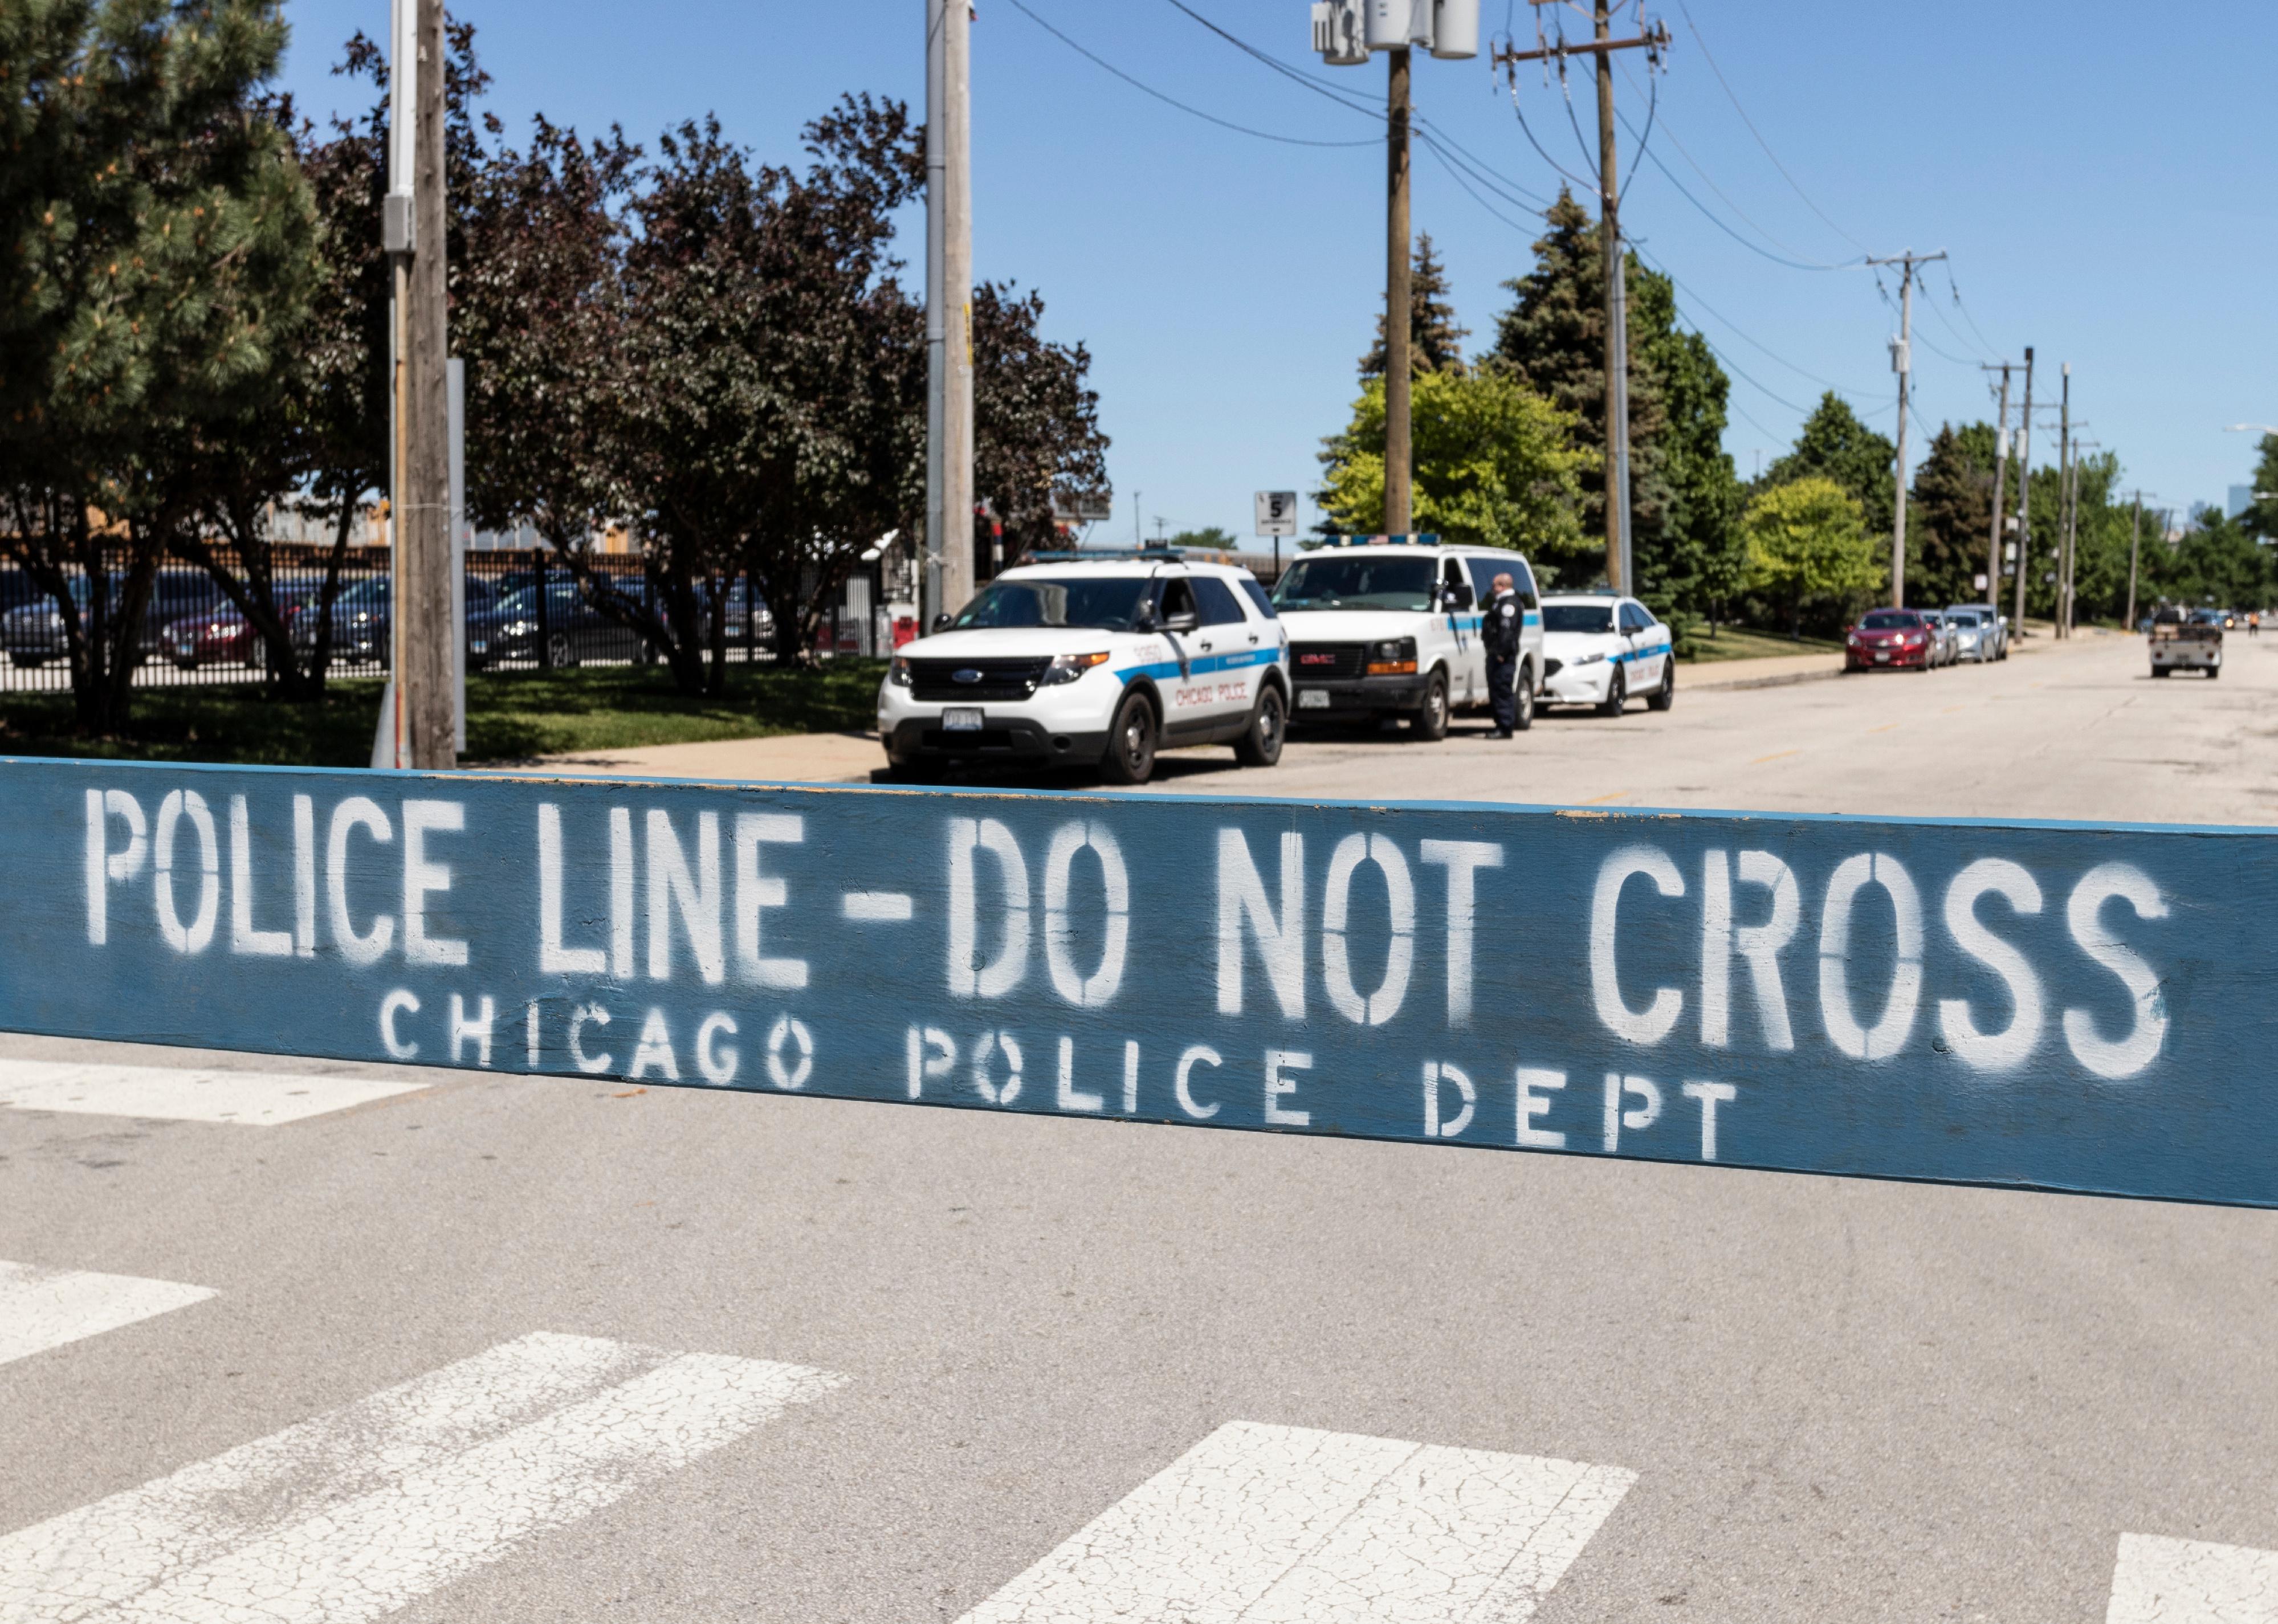 POLICE LINE DO NOT CROSS sign courtesy of the Chicago Police Department.